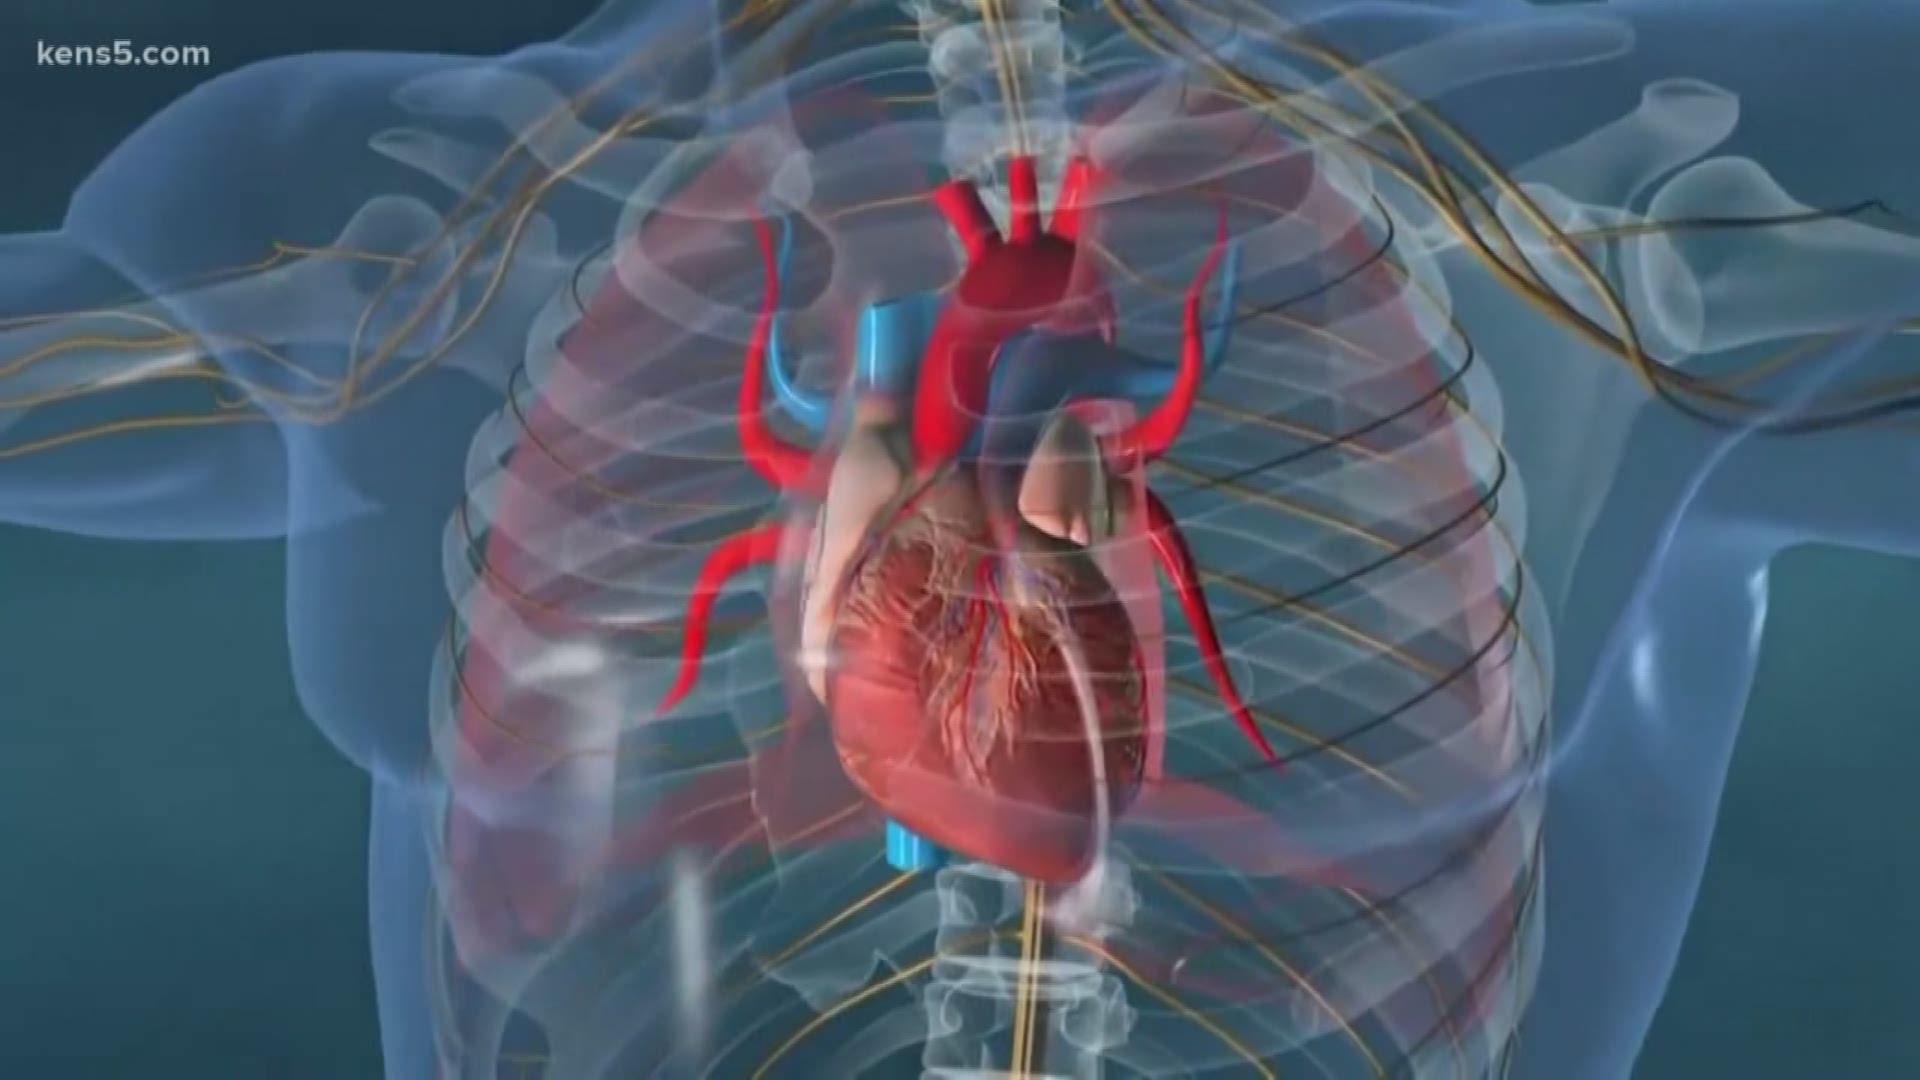 Every year more than 750,000 people are hospitalized because of atrial fibrillation, which is an irregular heartbeat. With an aging population that number is expected to rise.